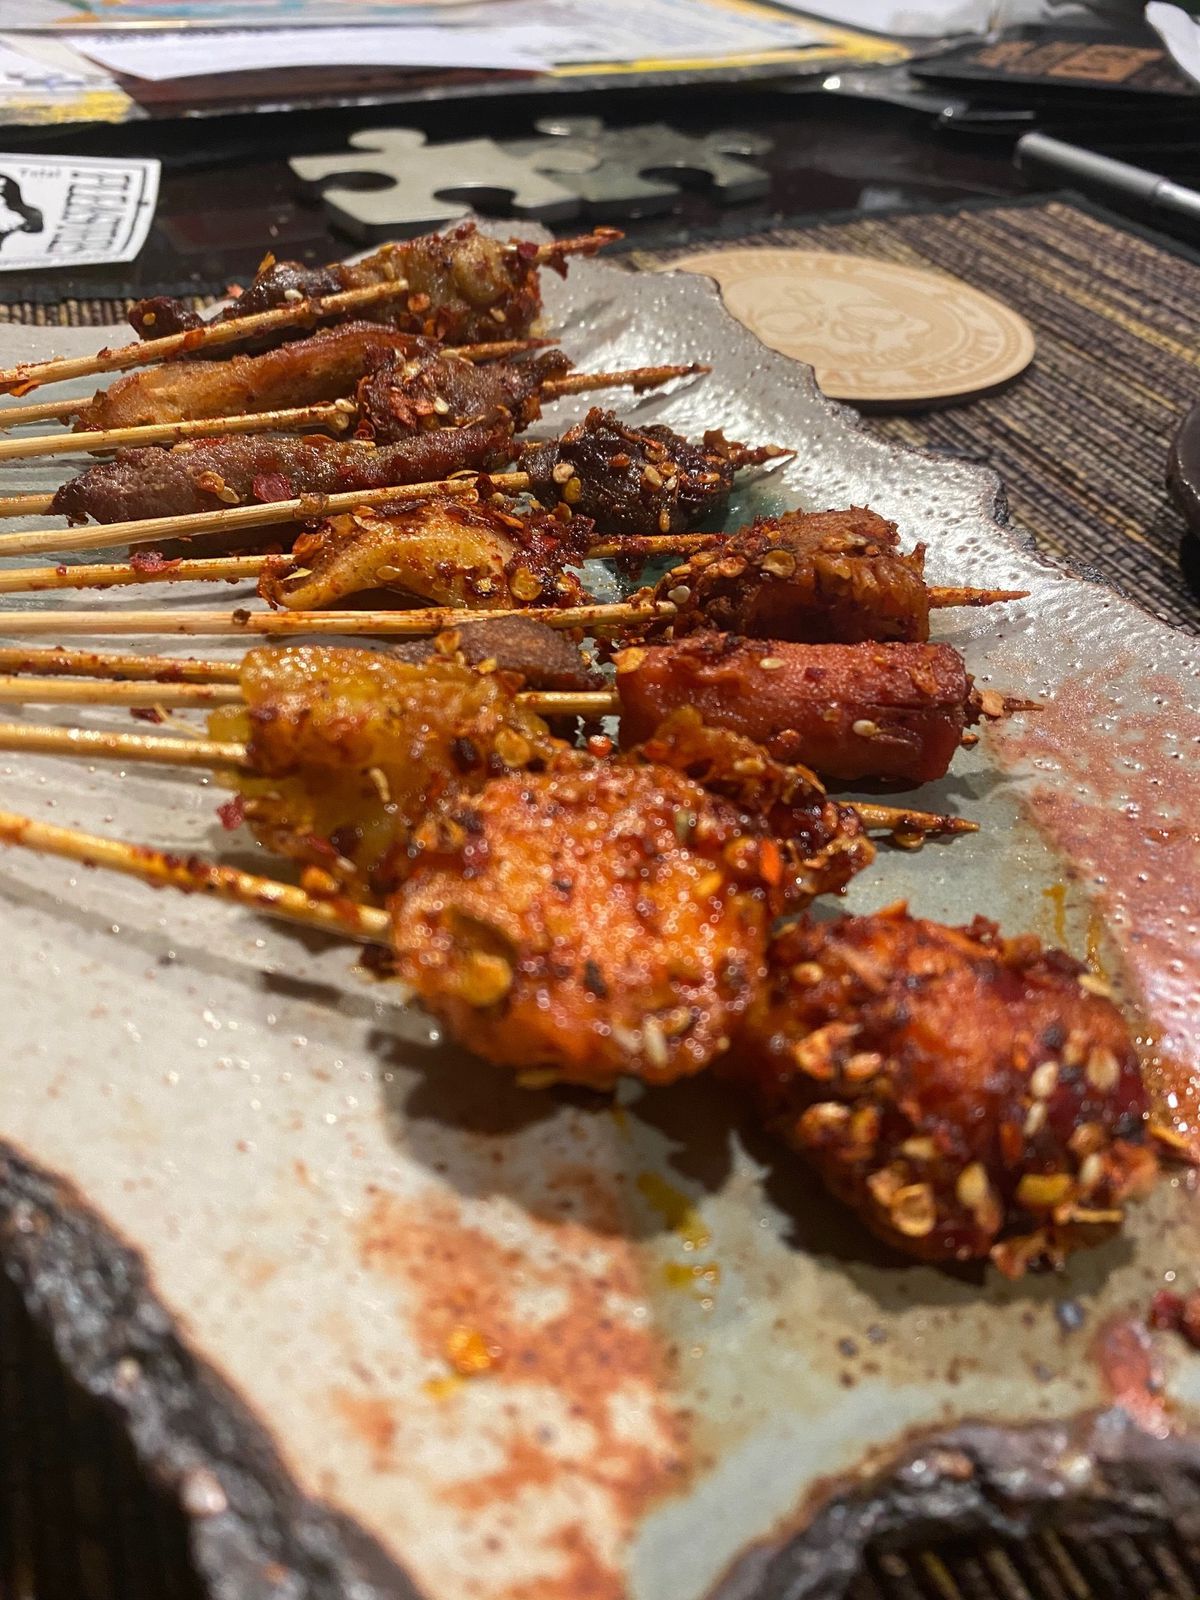 A spread of Sichuan meat skewers on a plate